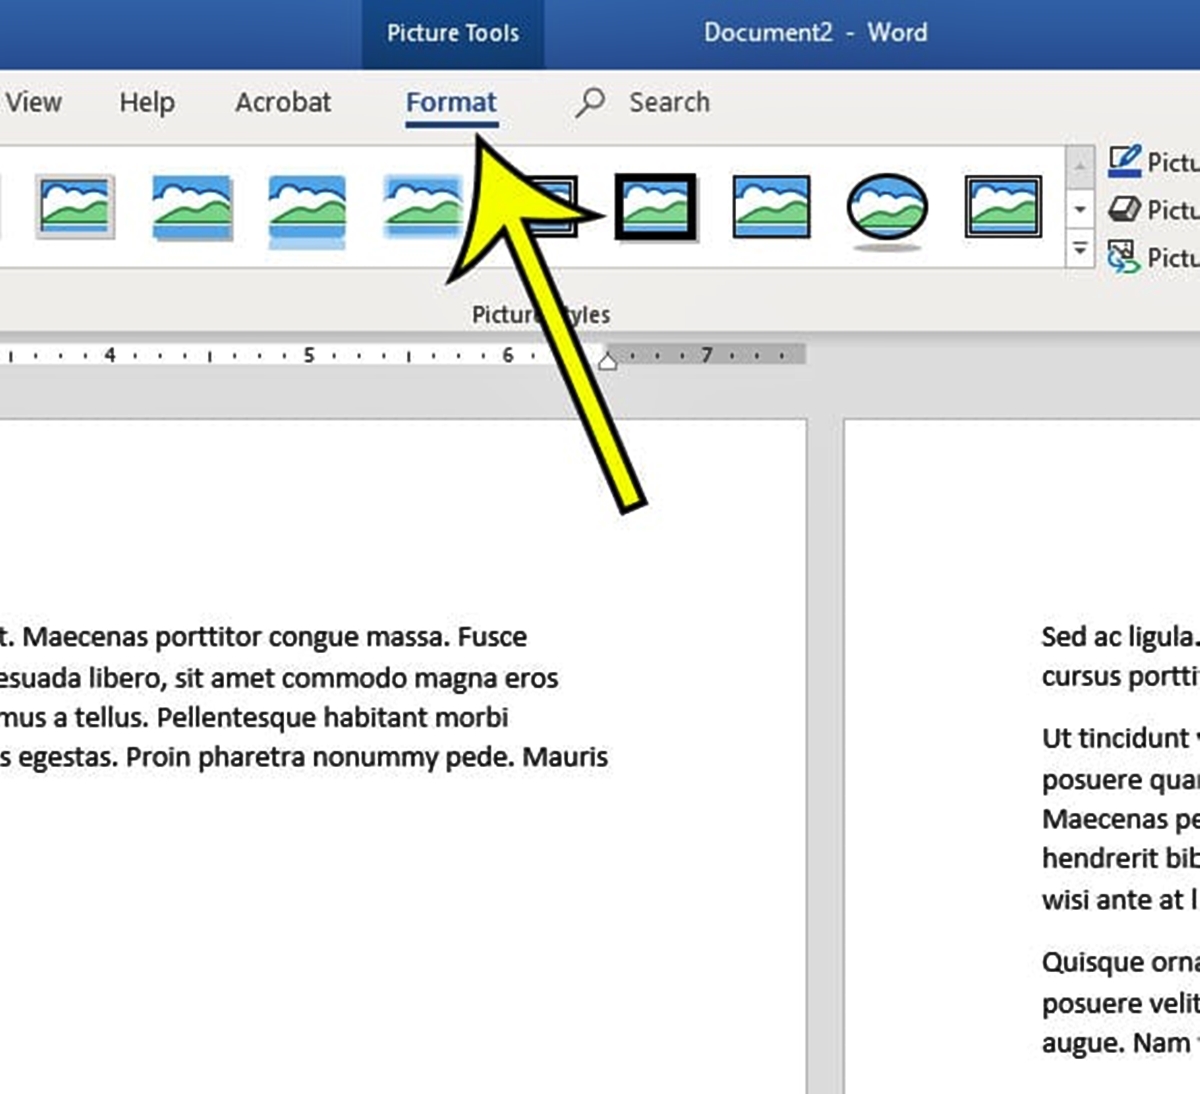 How To Mirror An Image In Microsoft Word